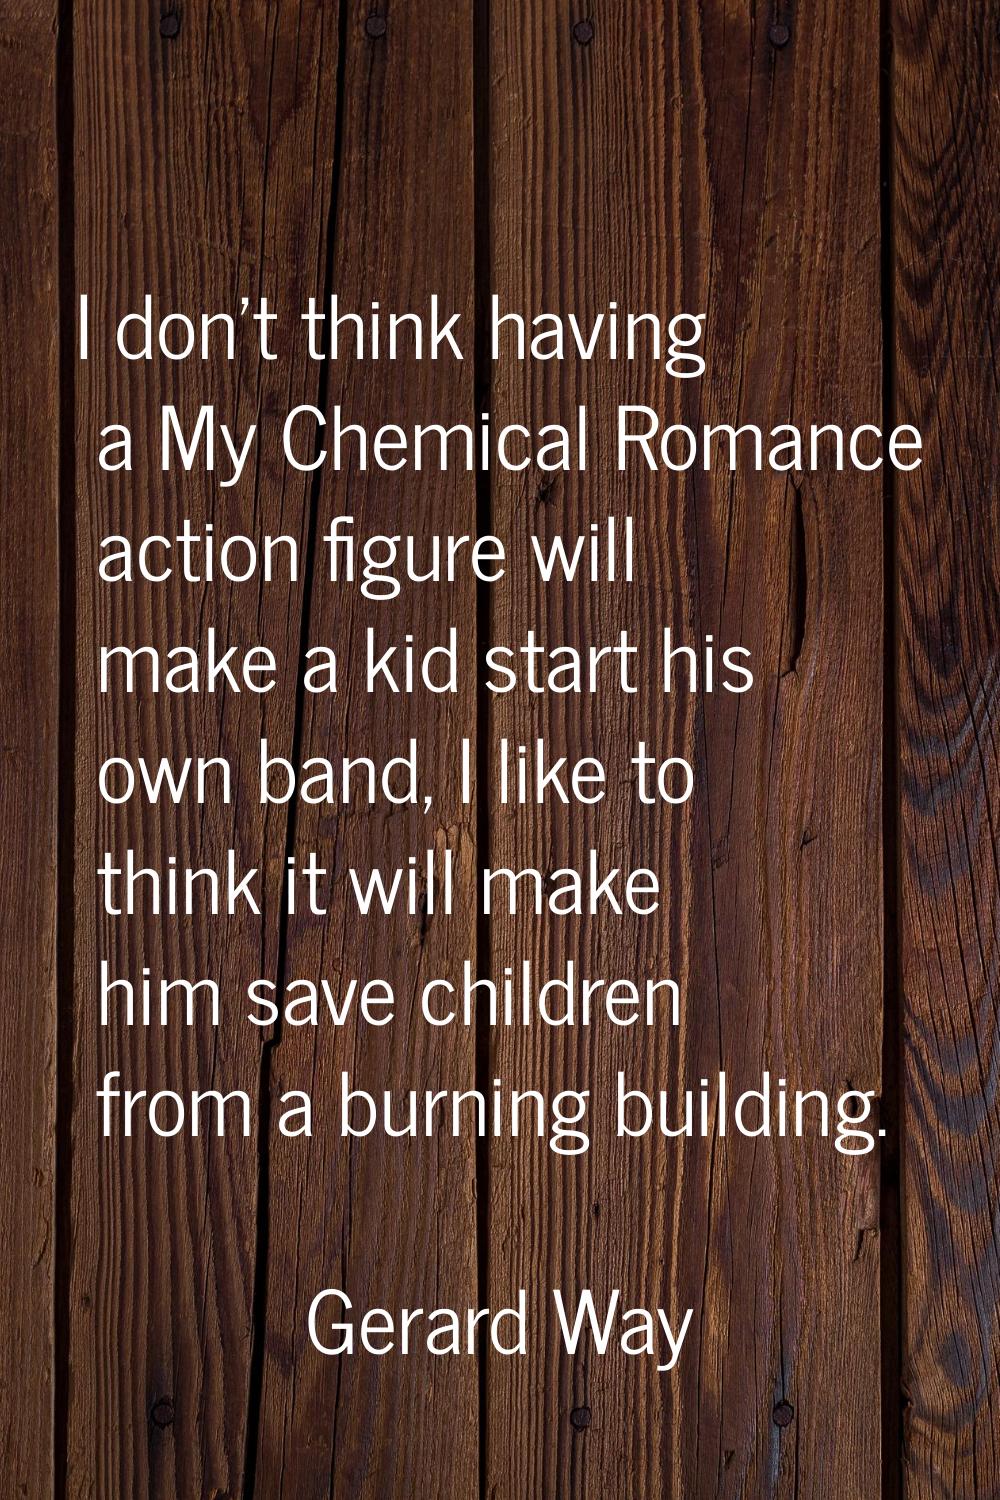 I don't think having a My Chemical Romance action figure will make a kid start his own band, I like